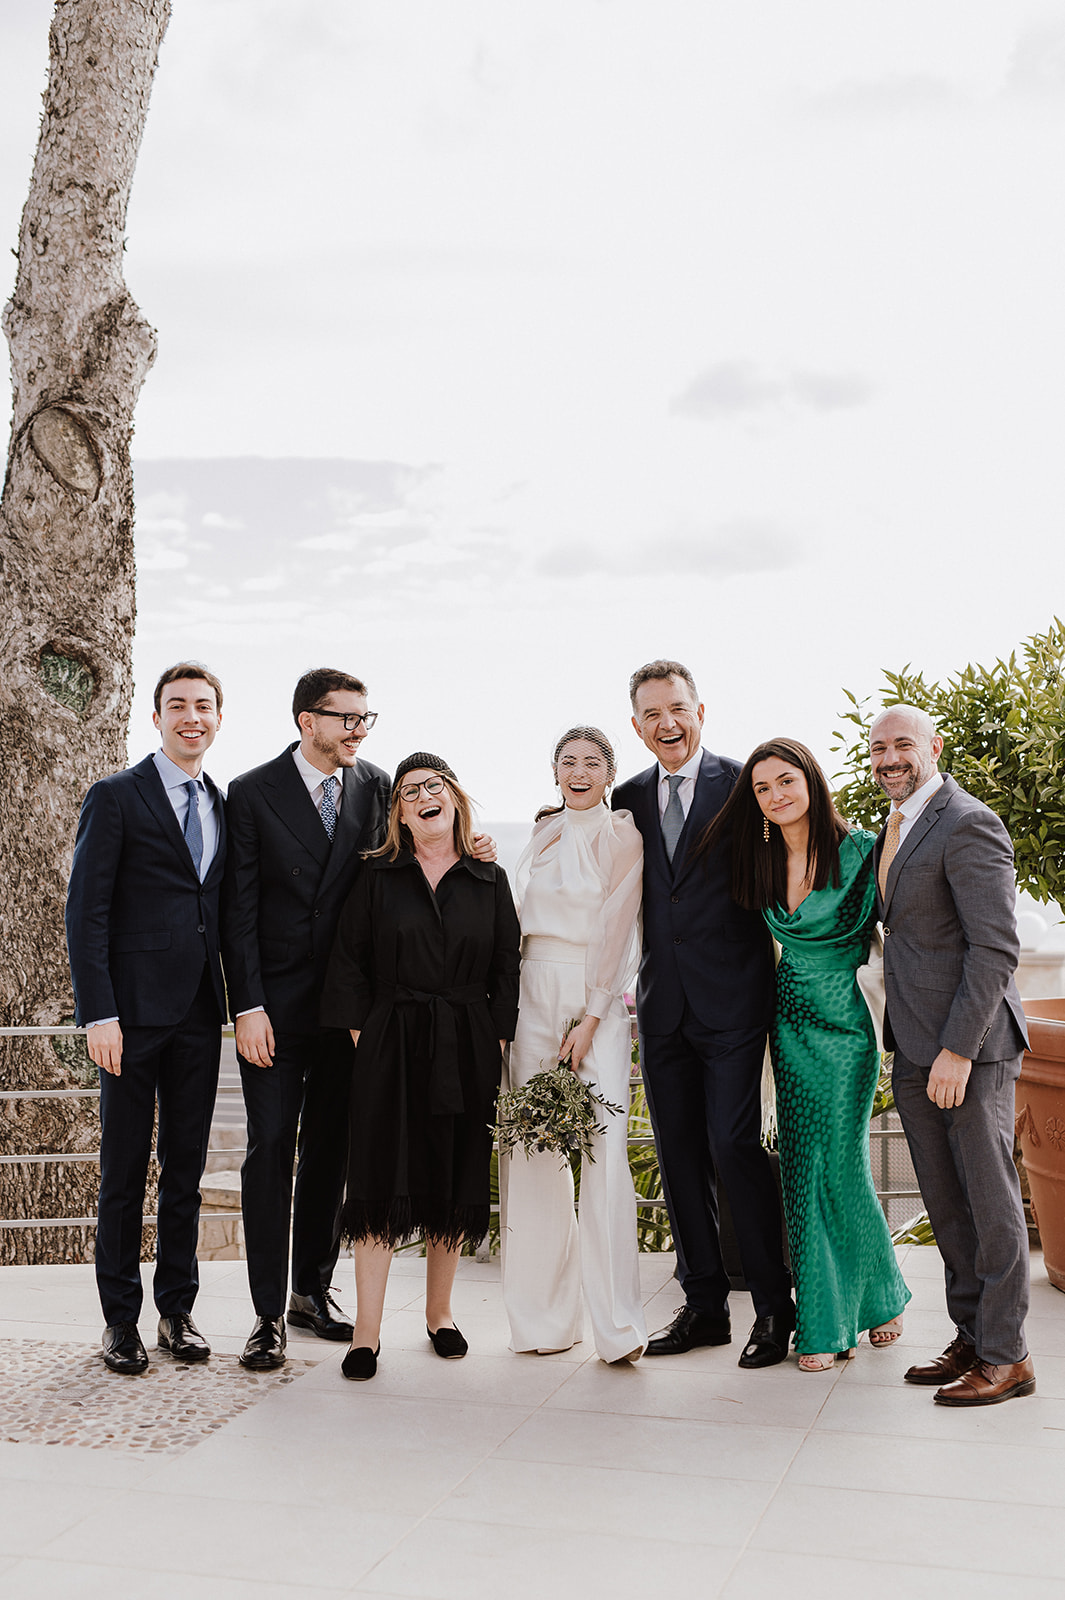 Getting married in winter in Mallorca. Why should you do it?